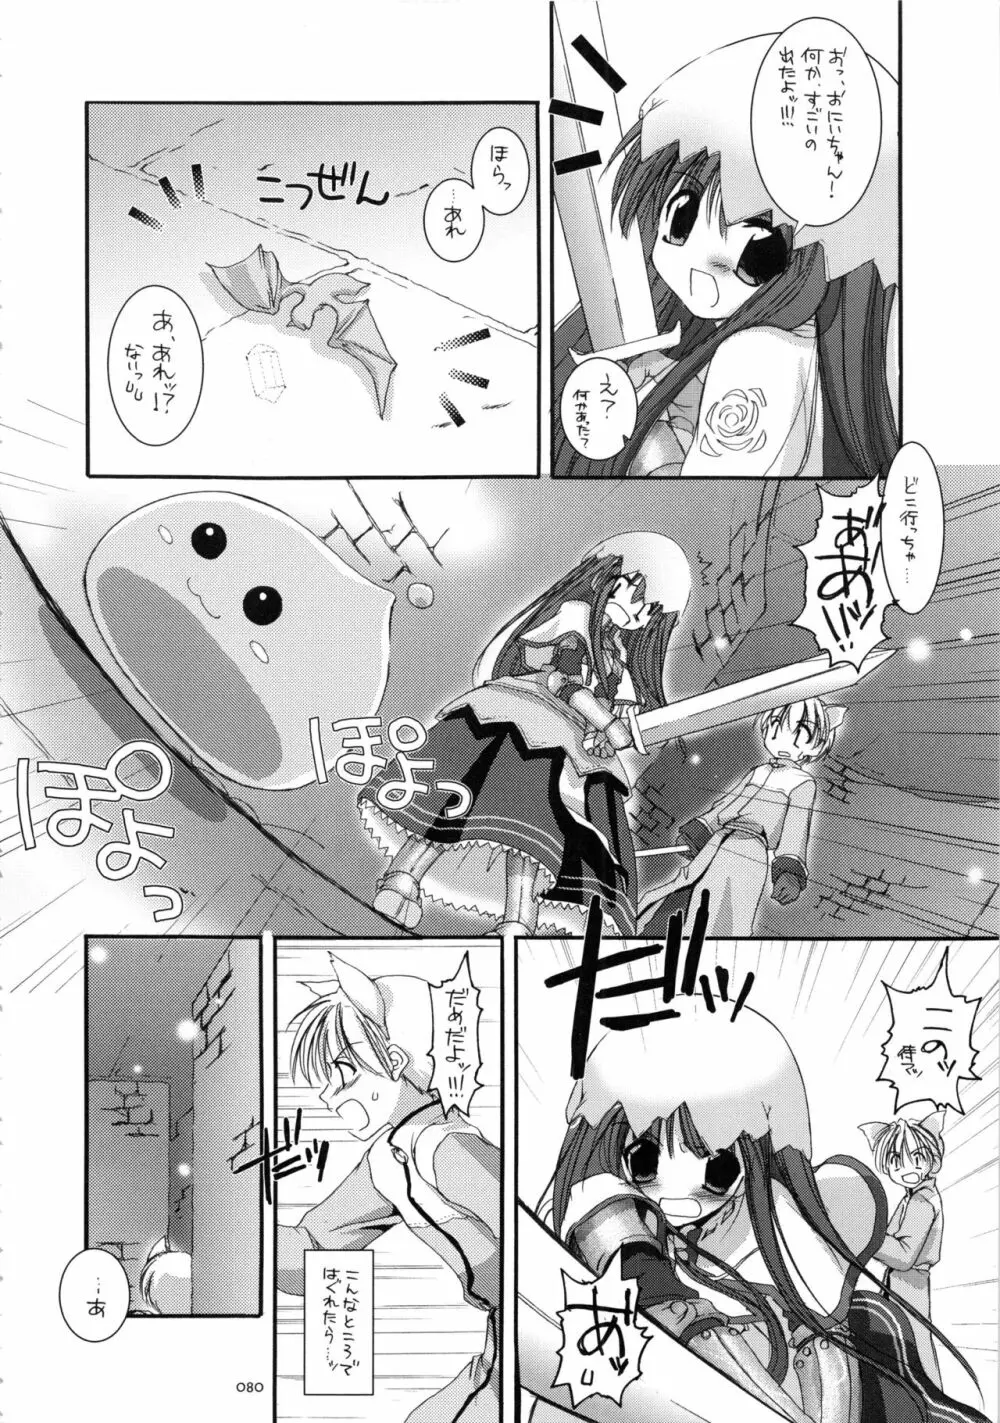 DL-RO総集編01 - page79